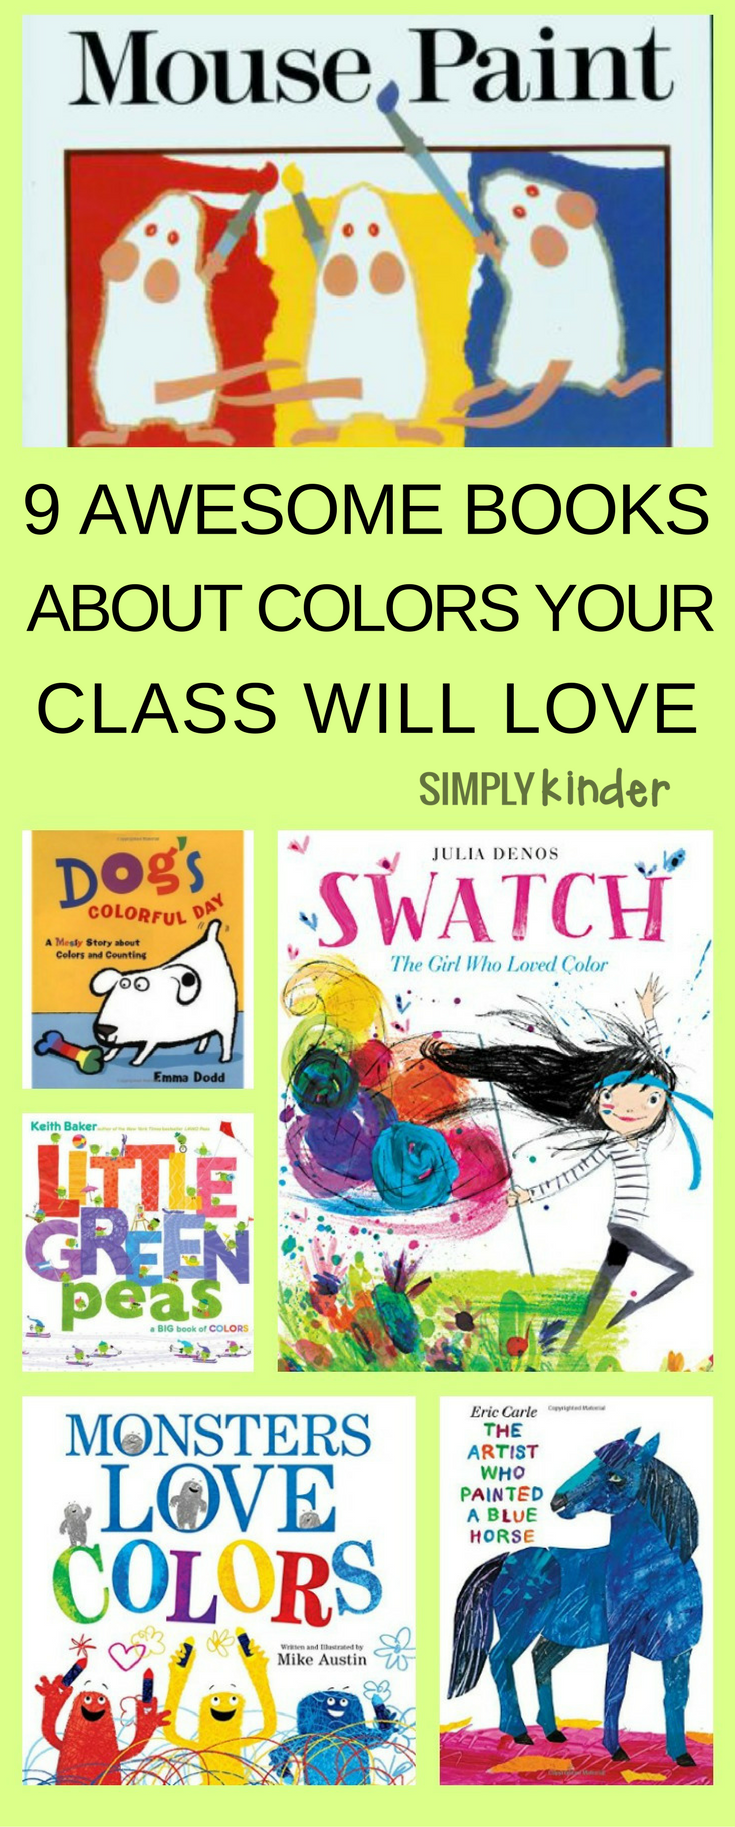 9 Awesome Books About Color Your Class Will Love